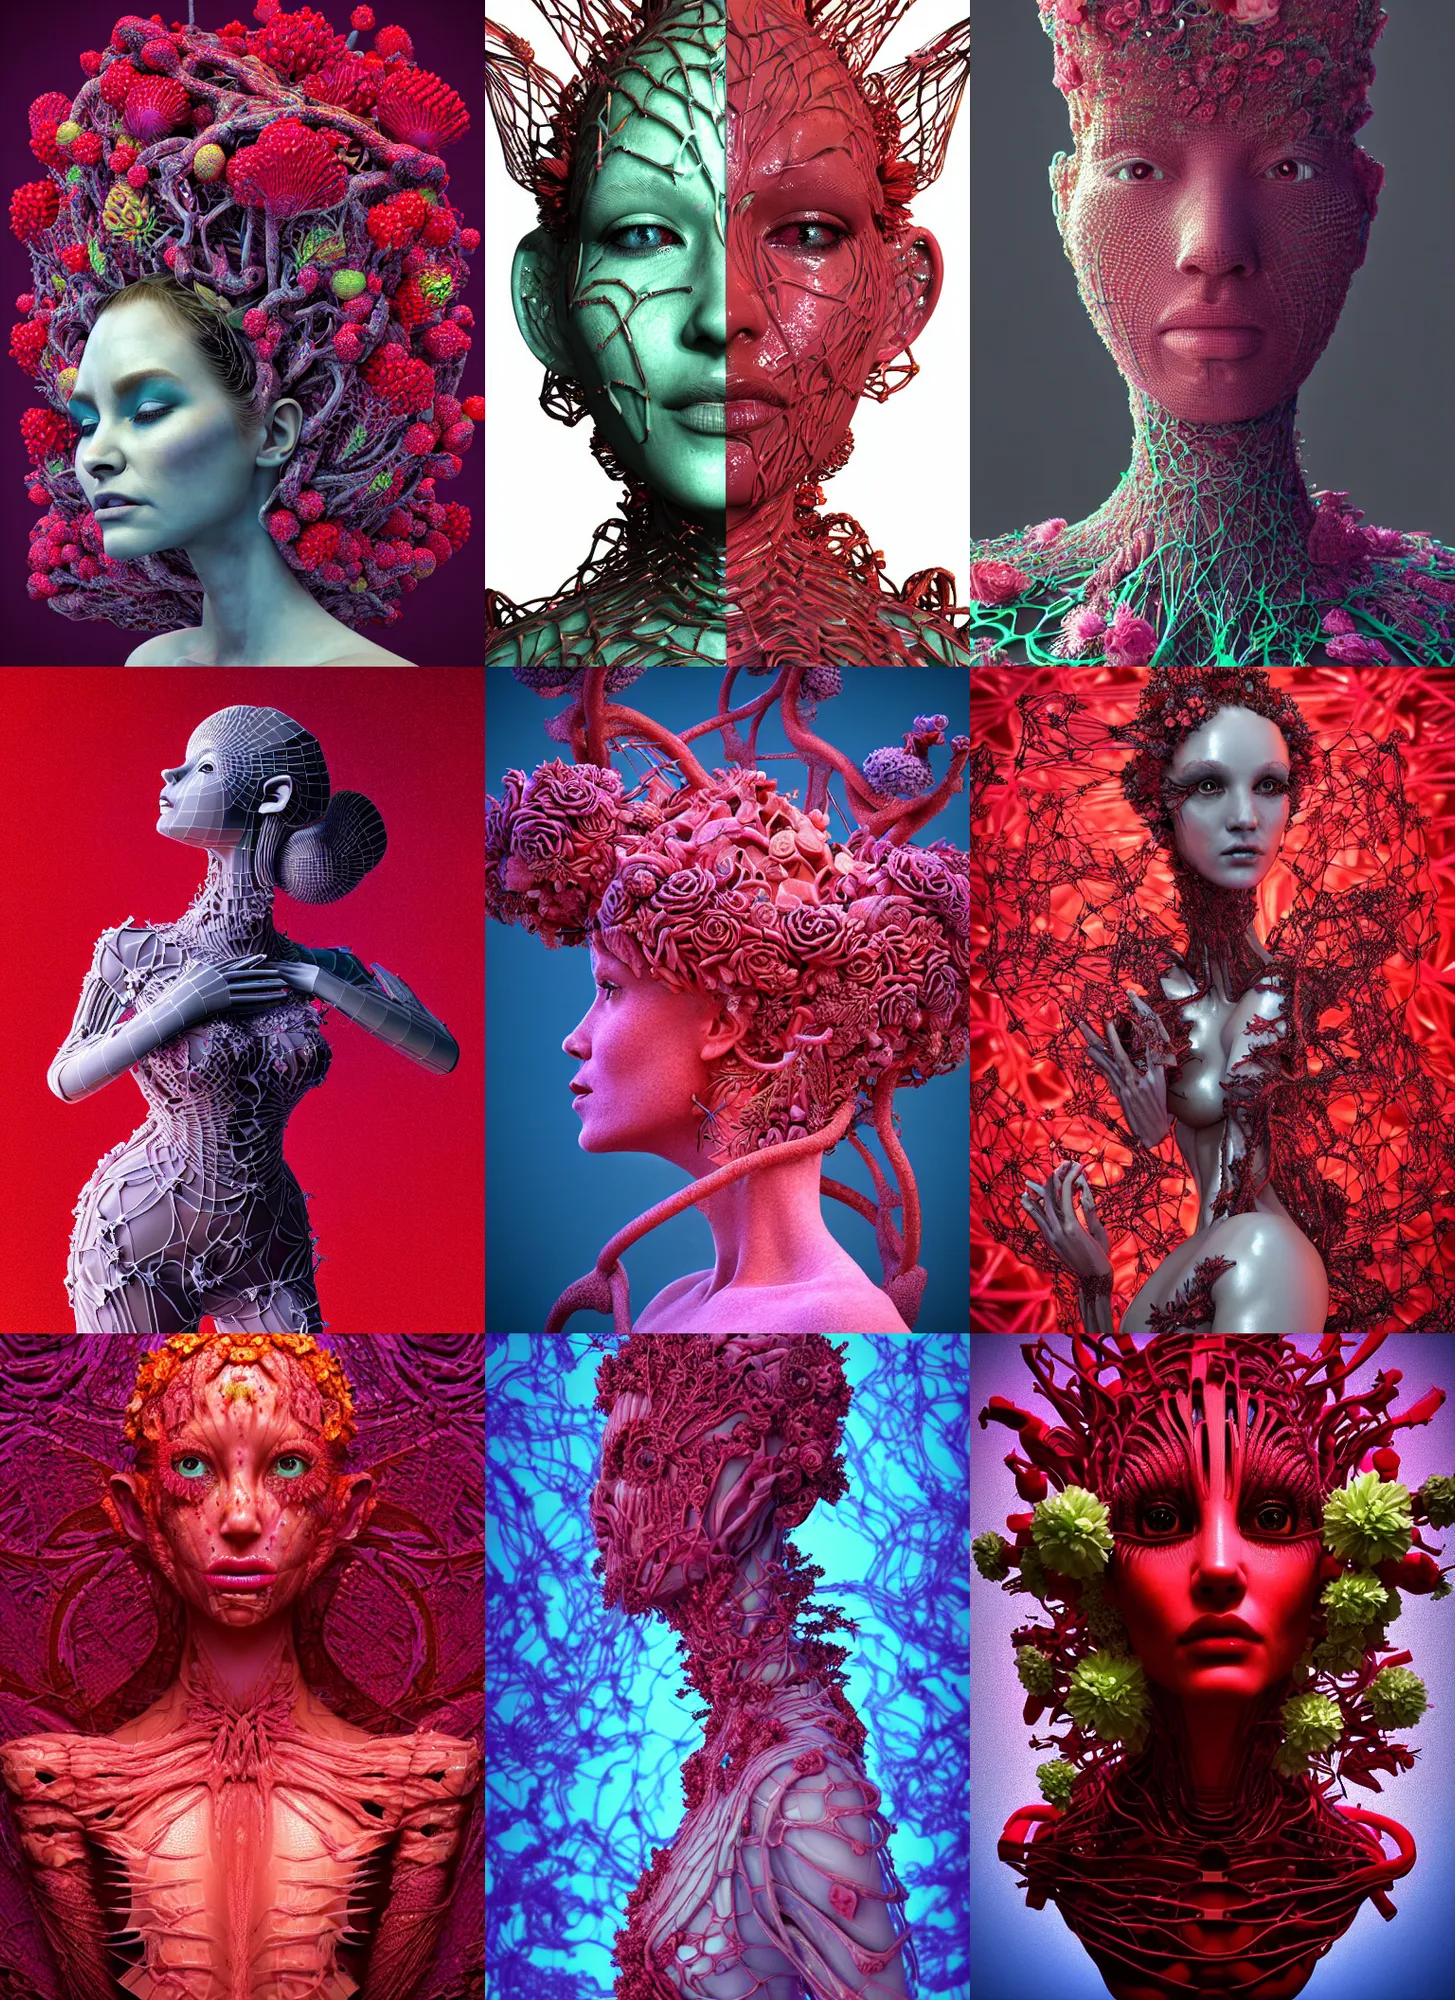 Prompt: hyper detailed 3d render like a sculpture - profile subsurface scattering (a beautiful fae princess protective playful expressive from that looks like a borg queen wearing a sundress made of flowers) seen red carpet photoshoot in UVIVF posing in caustic light pattern pool of water to Eat bite of the Strangling network of yellowcake aerochrome and milky Fruit and His delicate Hands hold of gossamer polyp blossoms bring iridescent fungal flowers whose spores black the foolish stars by Jacek Yerka, Ilya Kuvshinov, Mariusz Lewandowski, Houdini algorithmic generative render, golen ratio, Abstract brush strokes, Masterpiece, Victor Nizovtsev and James Gilleard, Zdzislaw Beksinski, Tom Whalen, Mark Ryden, Wolfgang Lettl, hints of Yayoi Kasuma and Dr. Seuss, Grant Wood, octane render, 8k